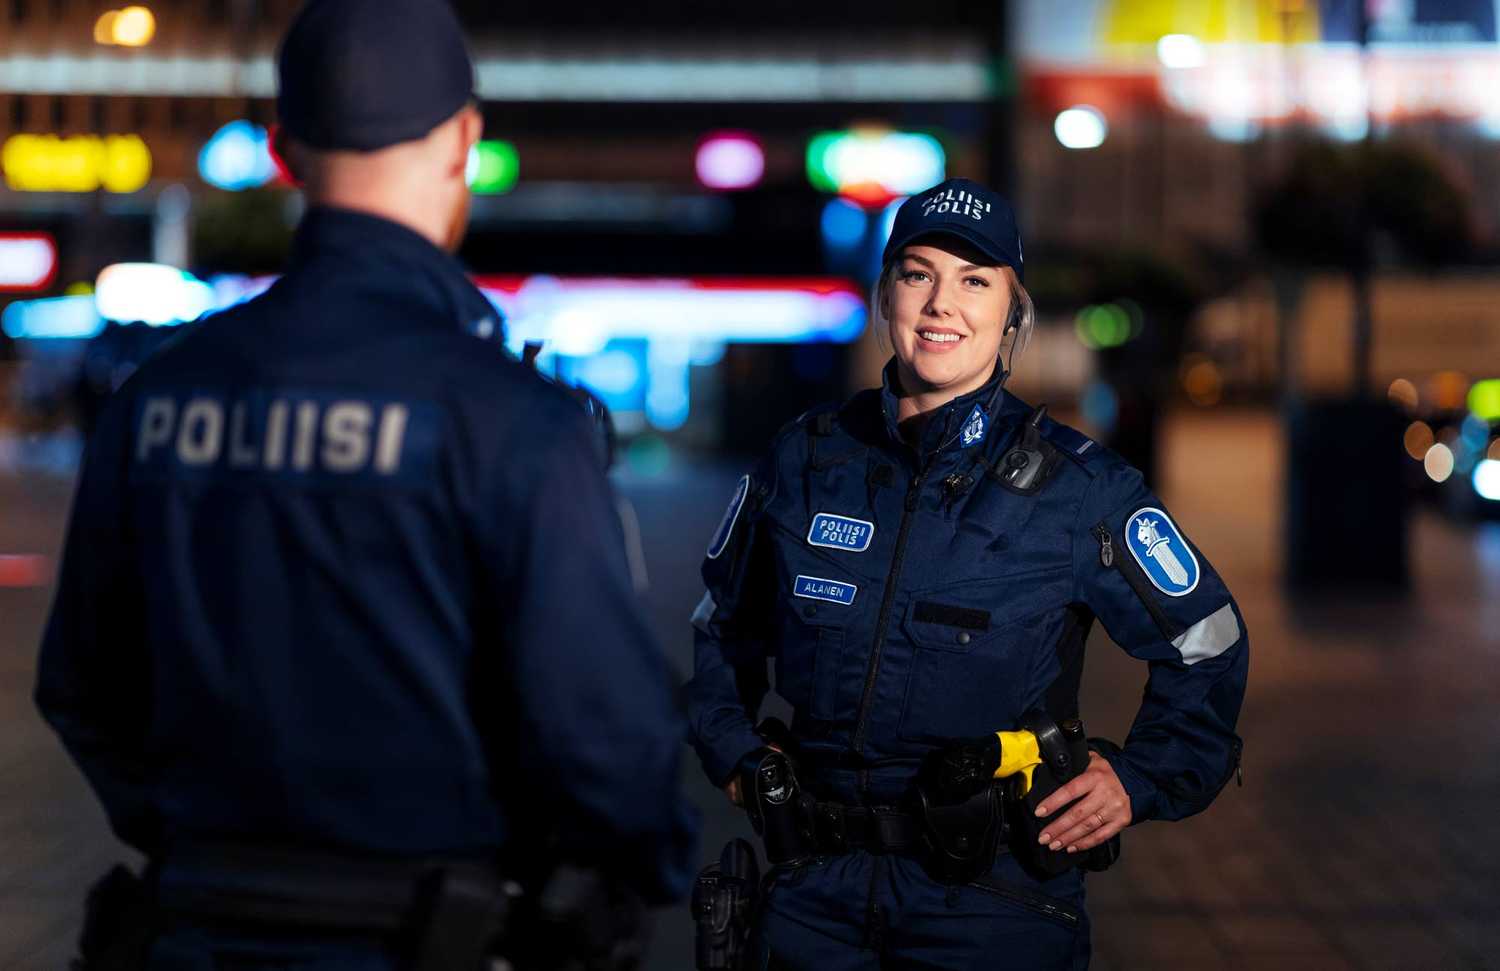 Two police officers in blue uniforms, the female police officer facing the camera, the red-bearded male police officer with his back to the camera. In the background, the city's colorful advertising lights.